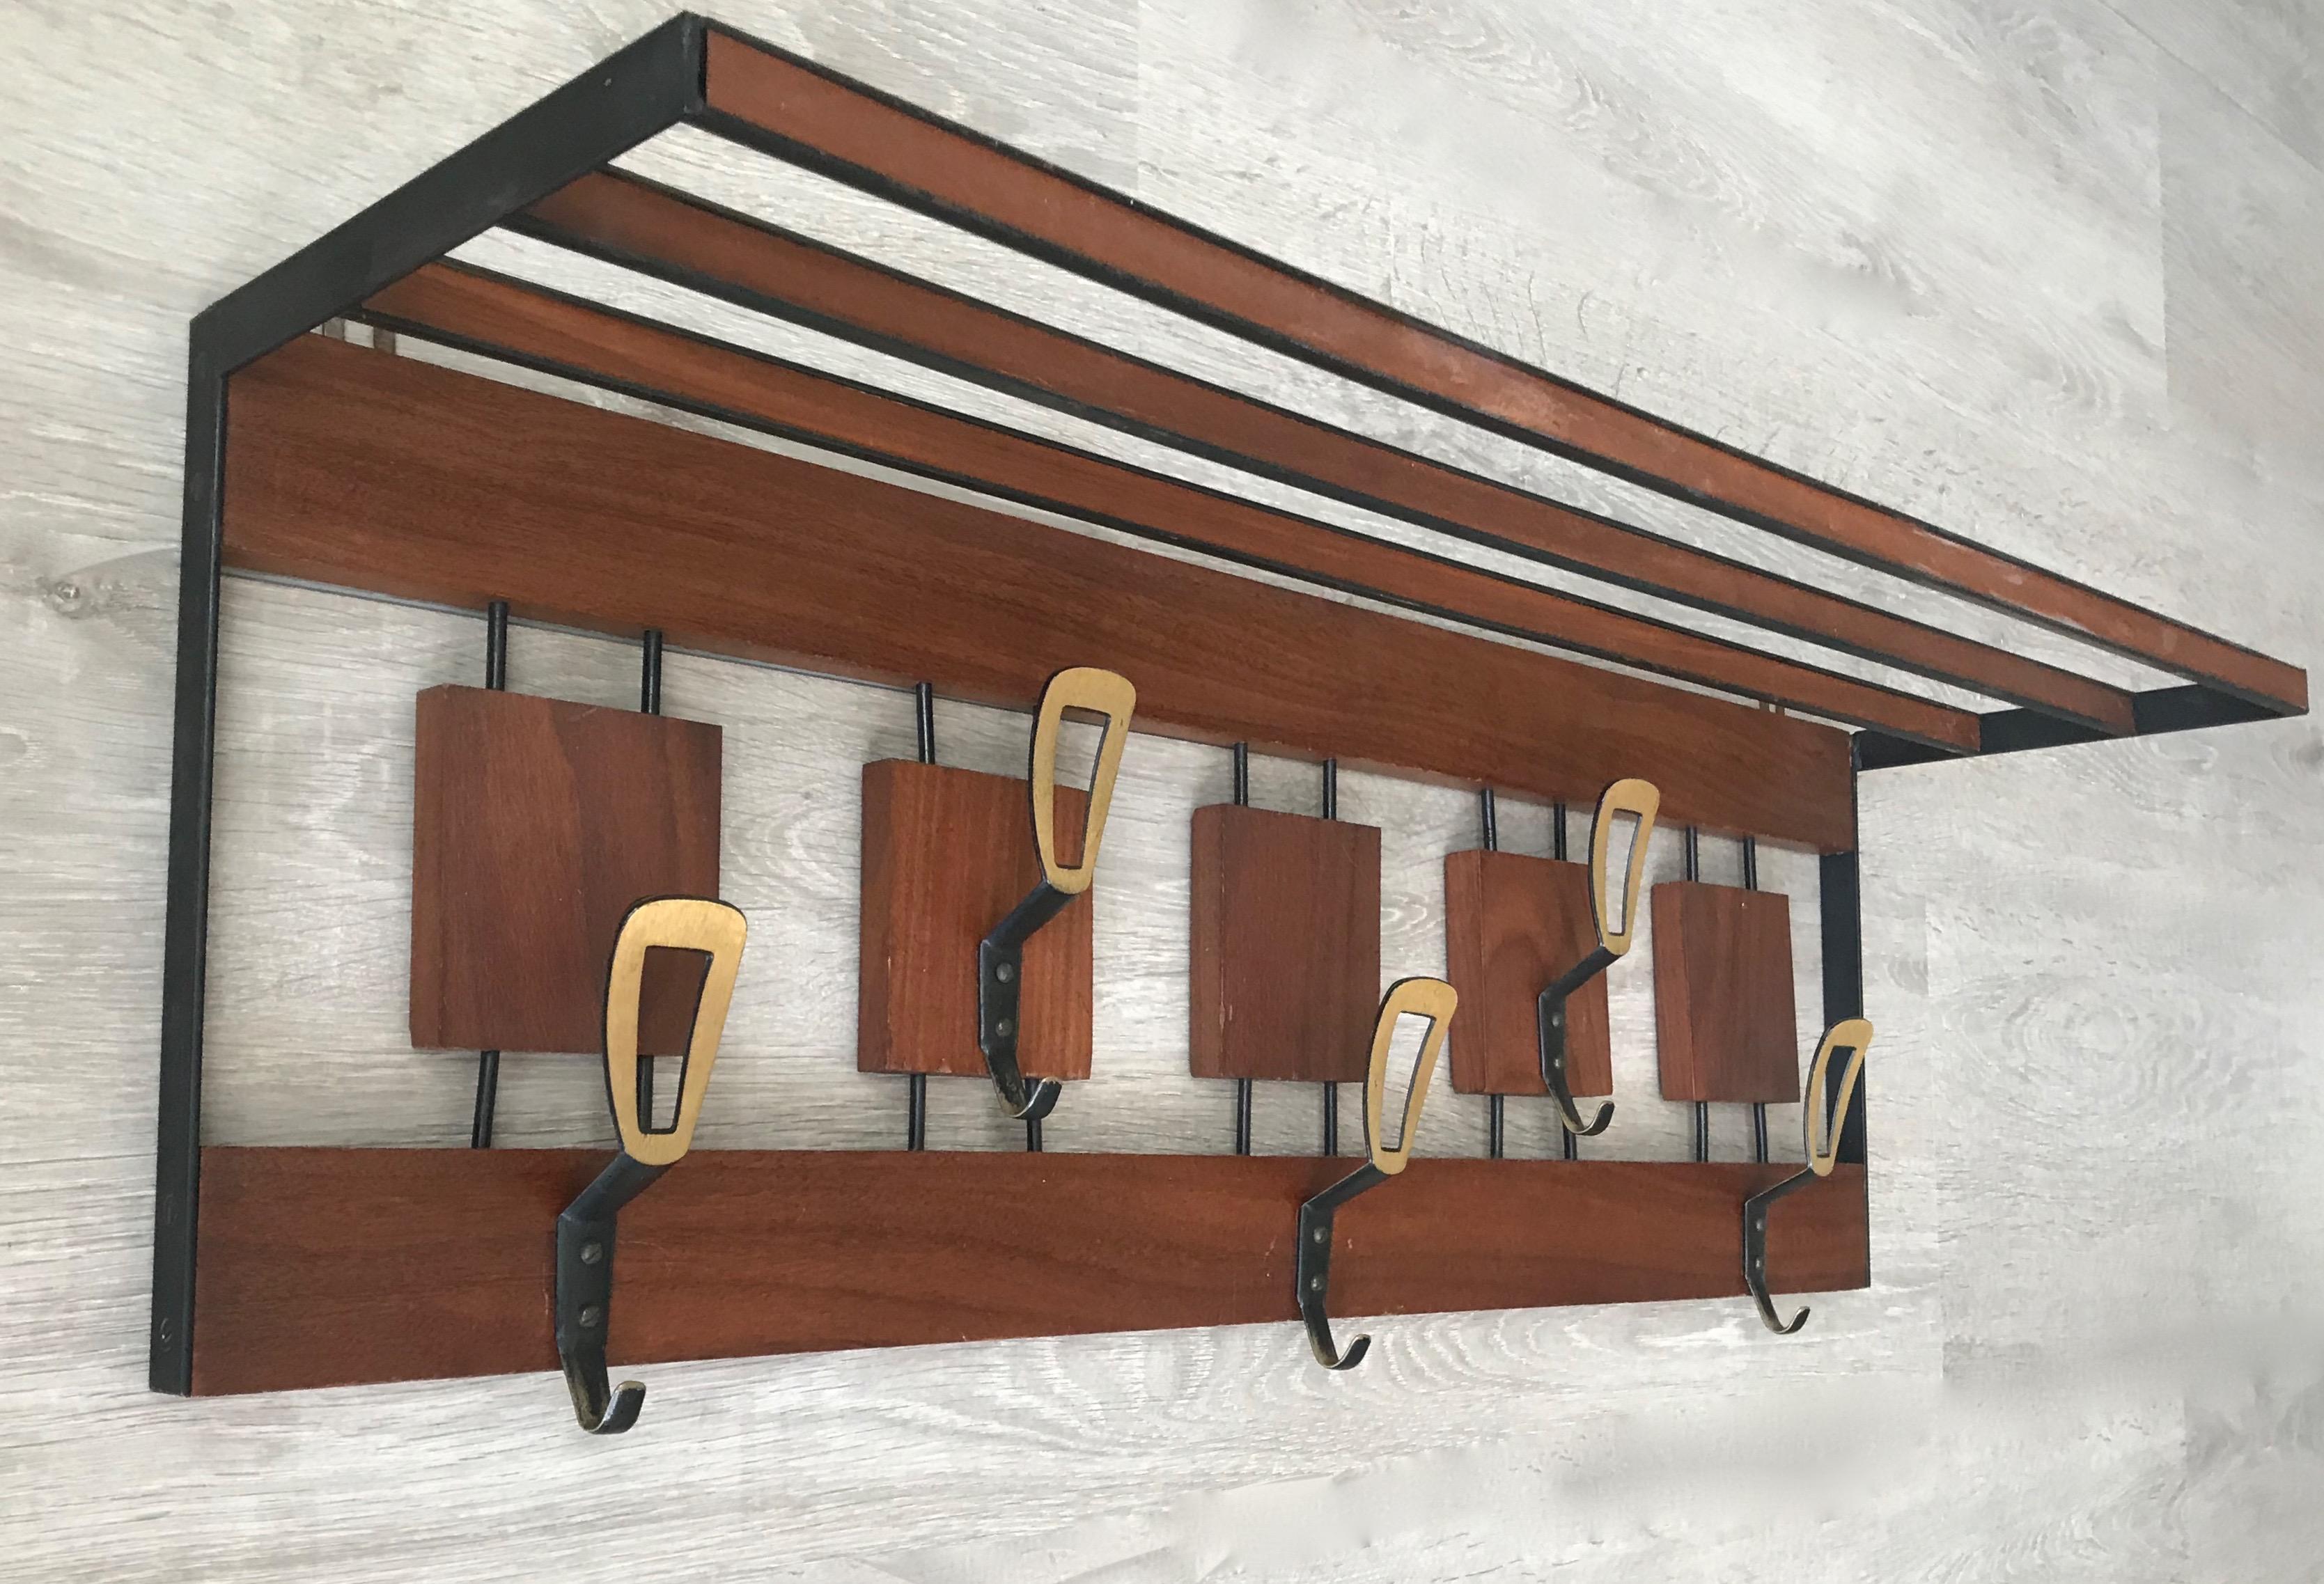 Rare and stylish Mid-Century Modern coat rack.

For the collectors of rare, European midcentury furniture we also have this designers wall coat rack by Hertha Baller. Its symmetrical and open design combined with the marvellous colors of the quality